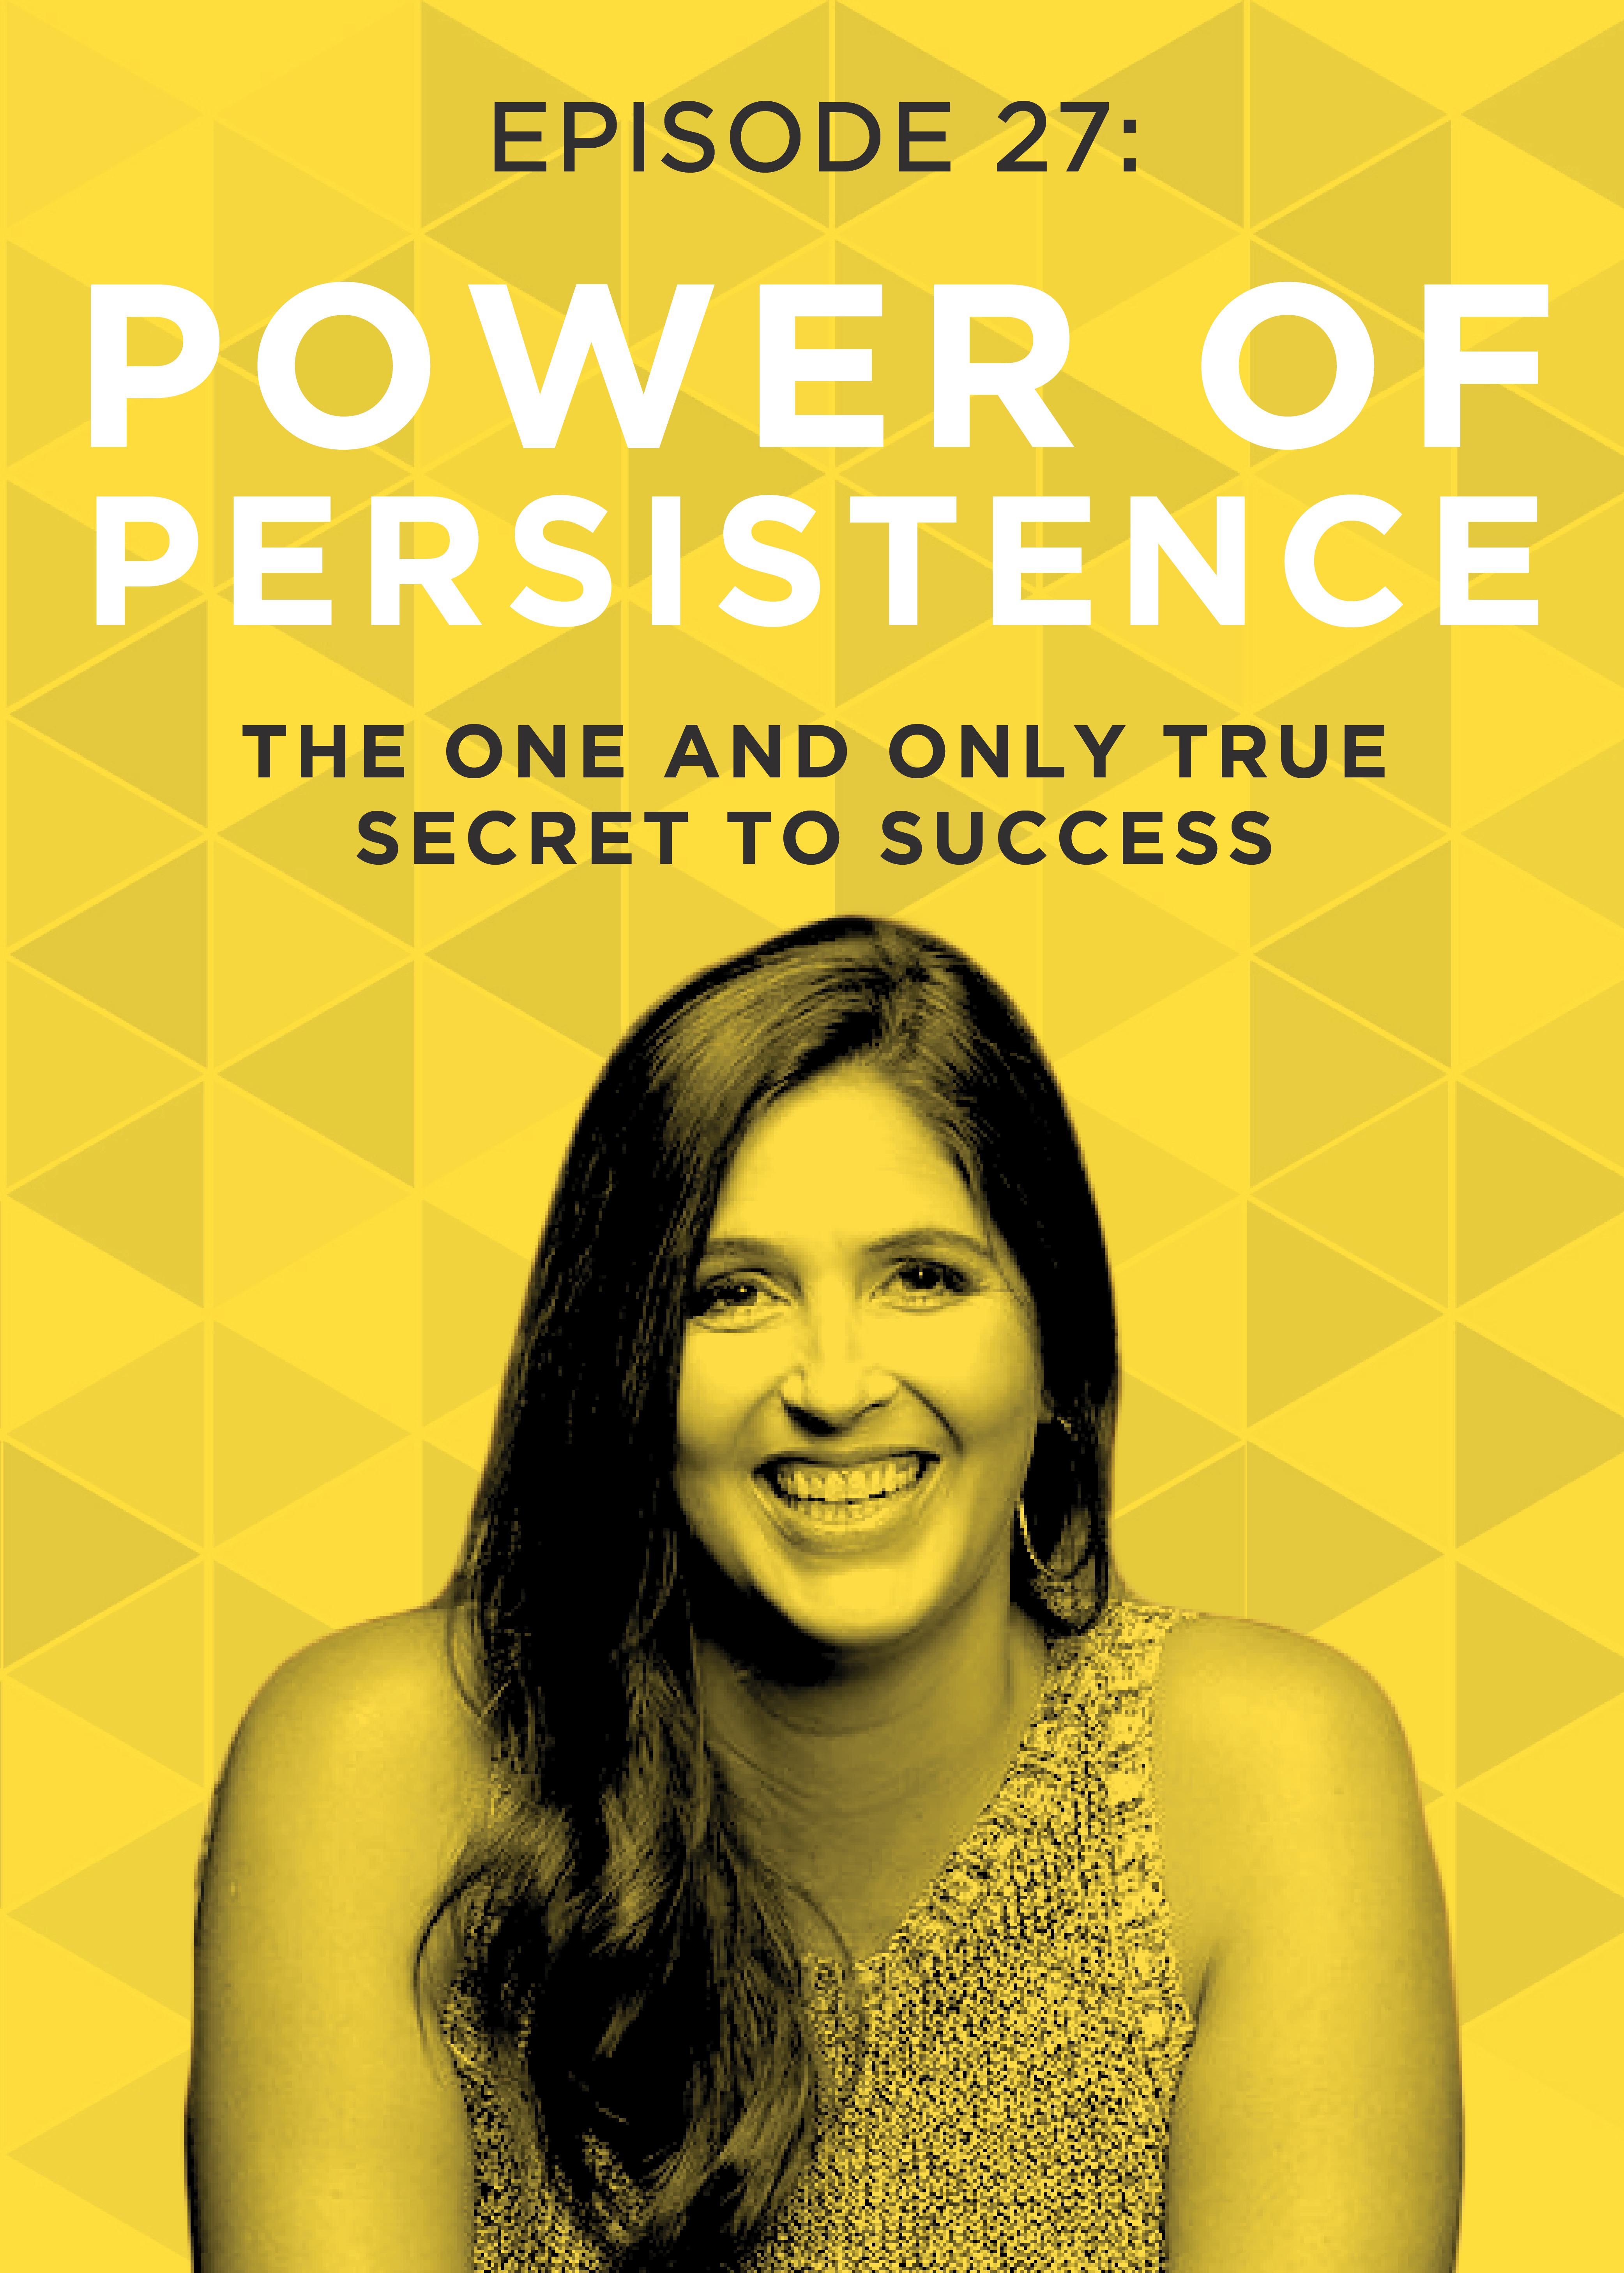 EP 27: The One and Only True Secret to Success